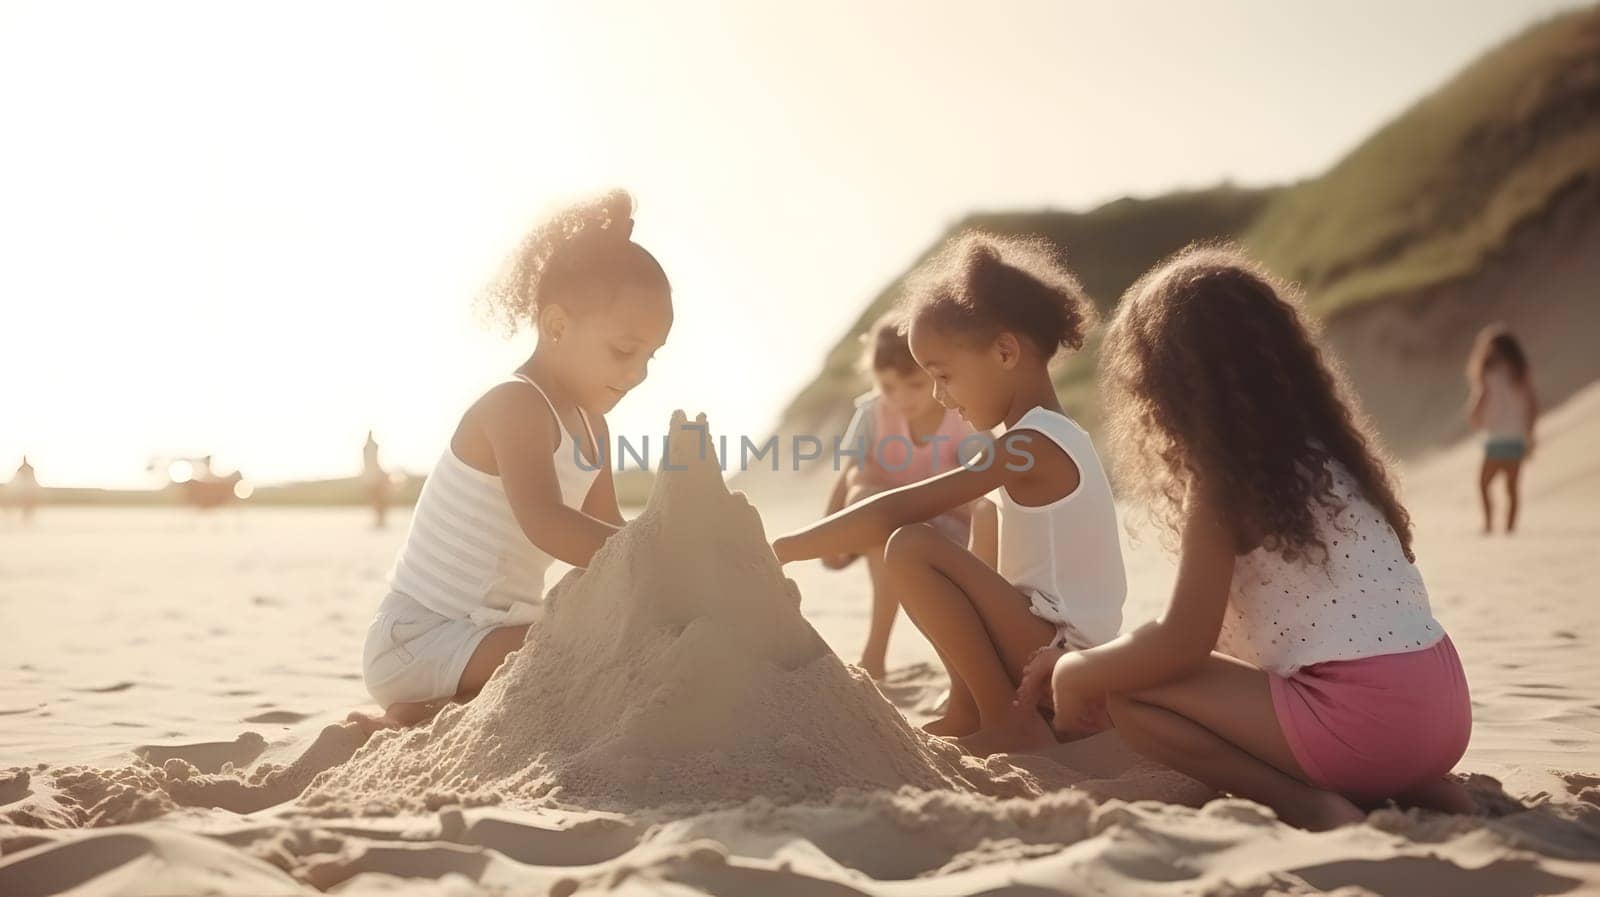 African american hildren making sand castles on the beach. Neural network generated in May 2023. Not based on any actual person, scene or pattern.